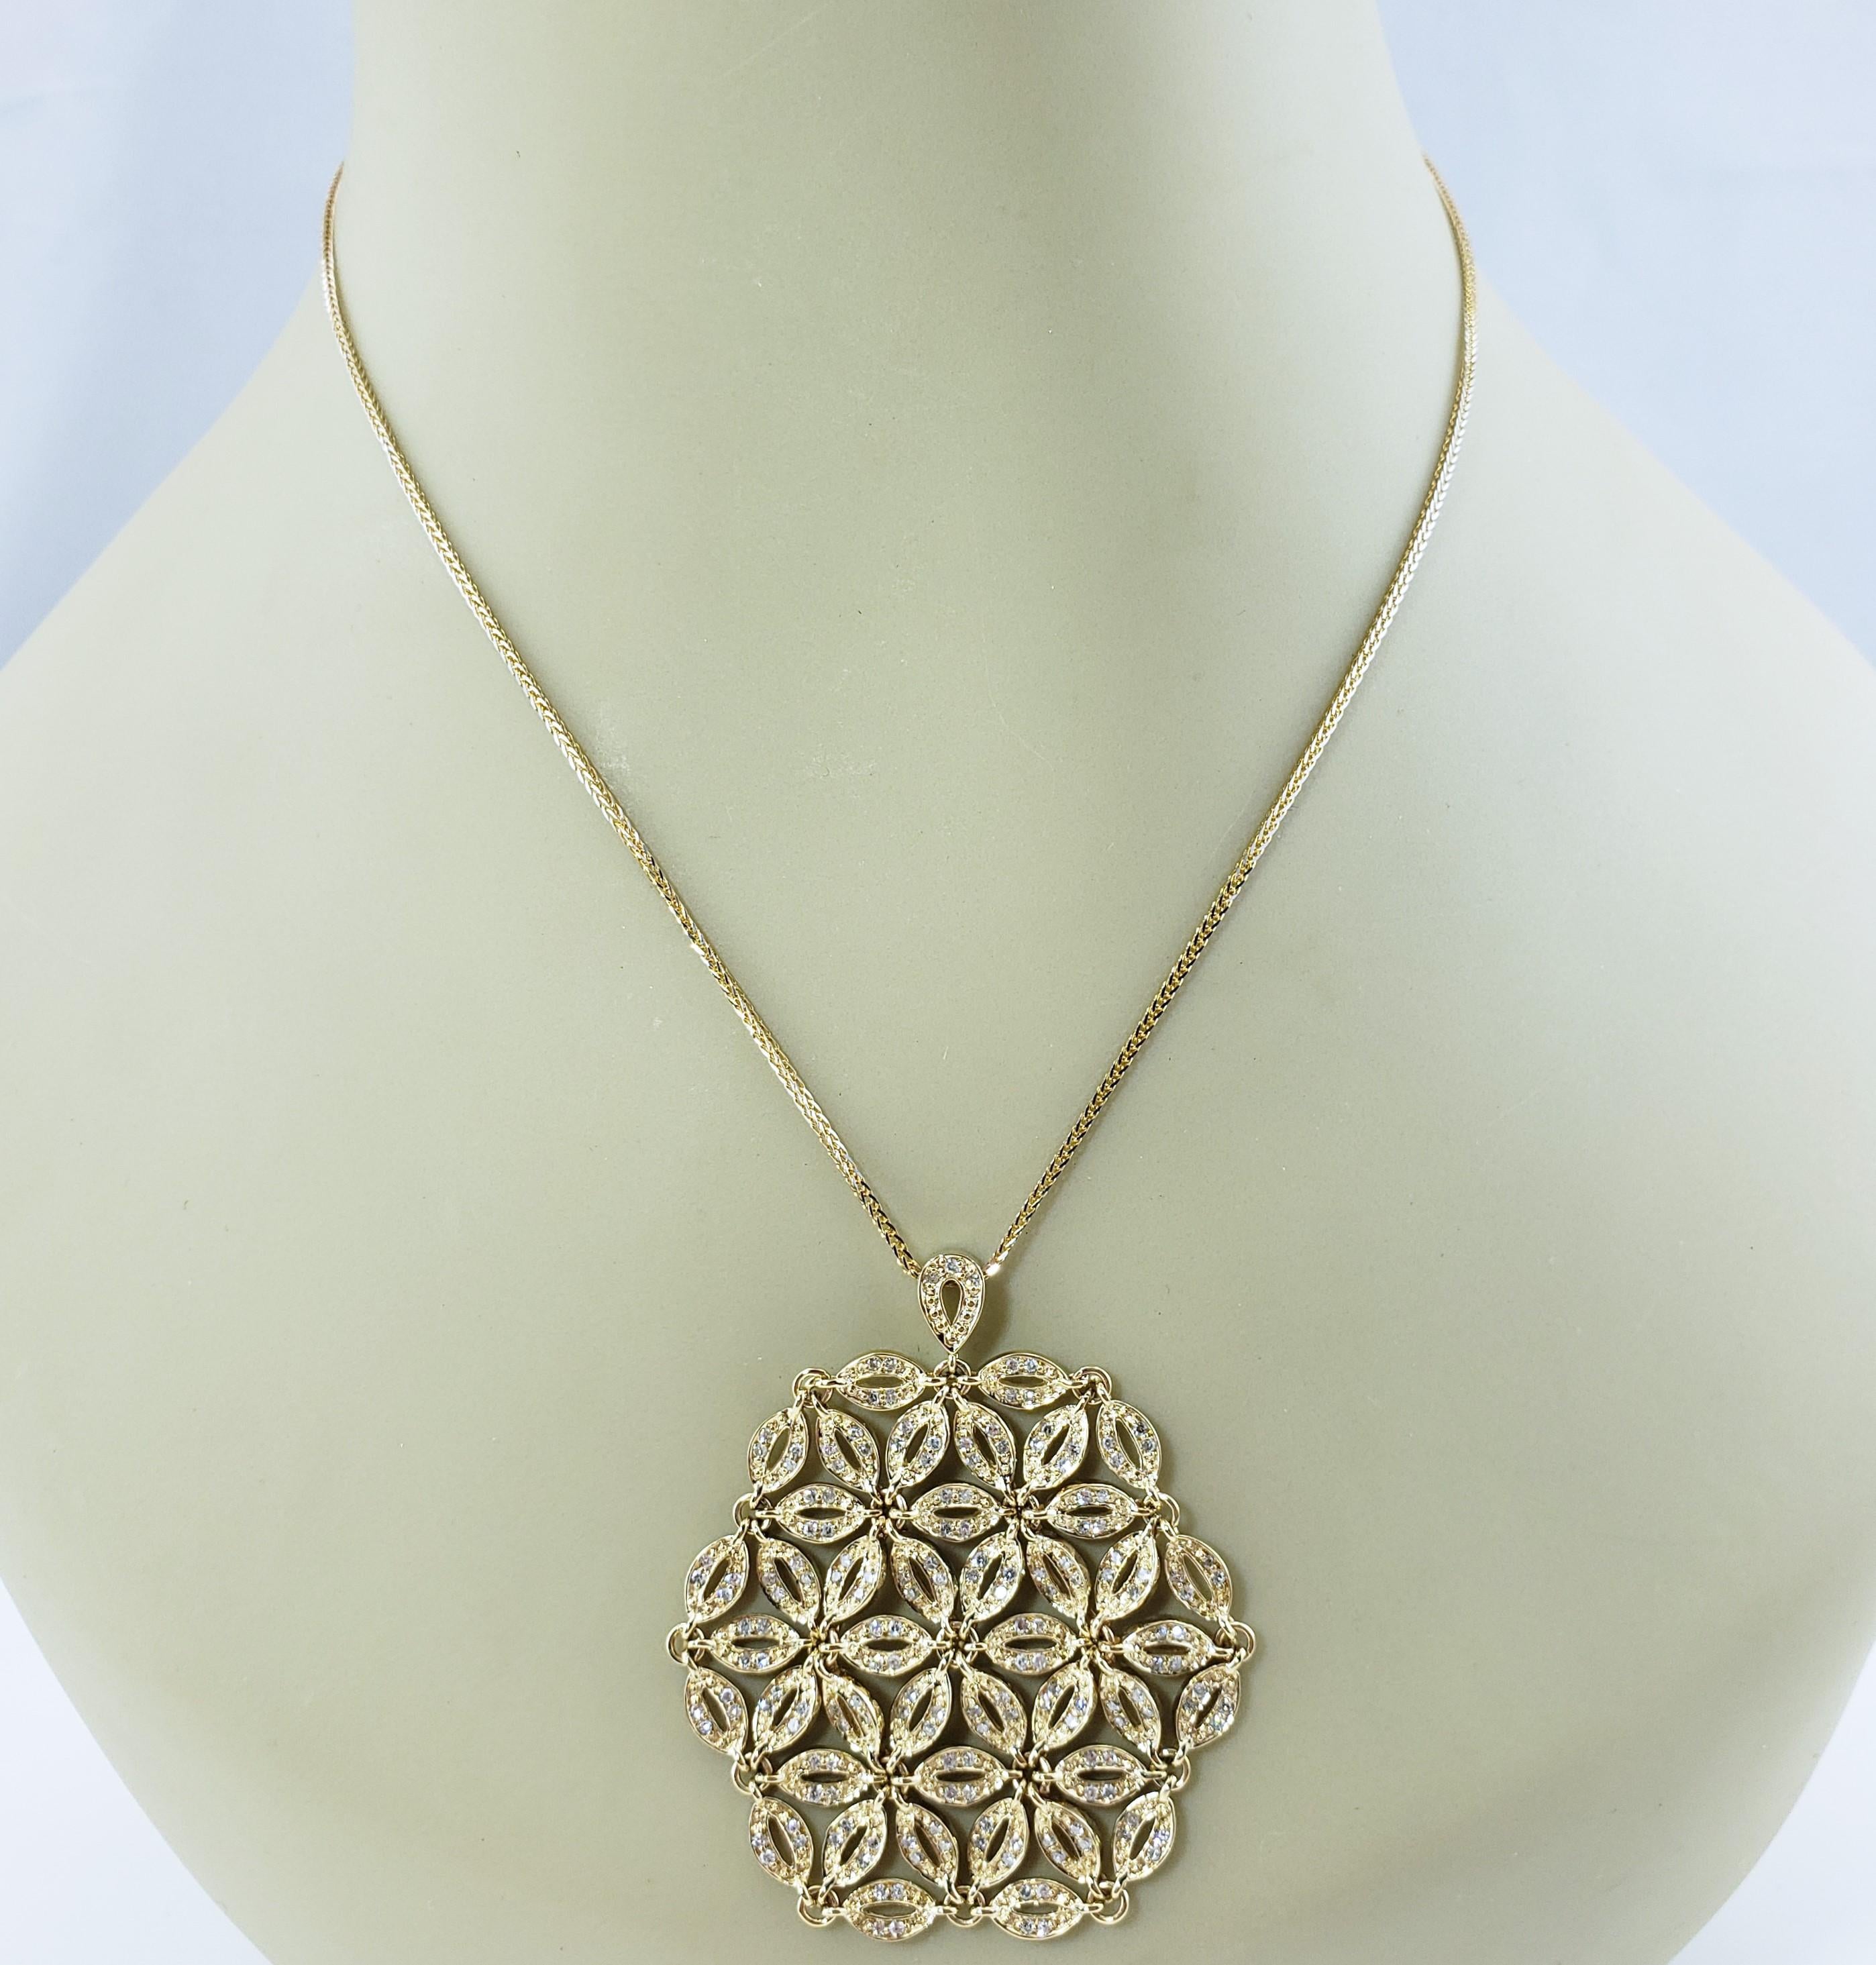  14 Karat Yellow Gold and Diamond Pendant Necklace For Sale 1